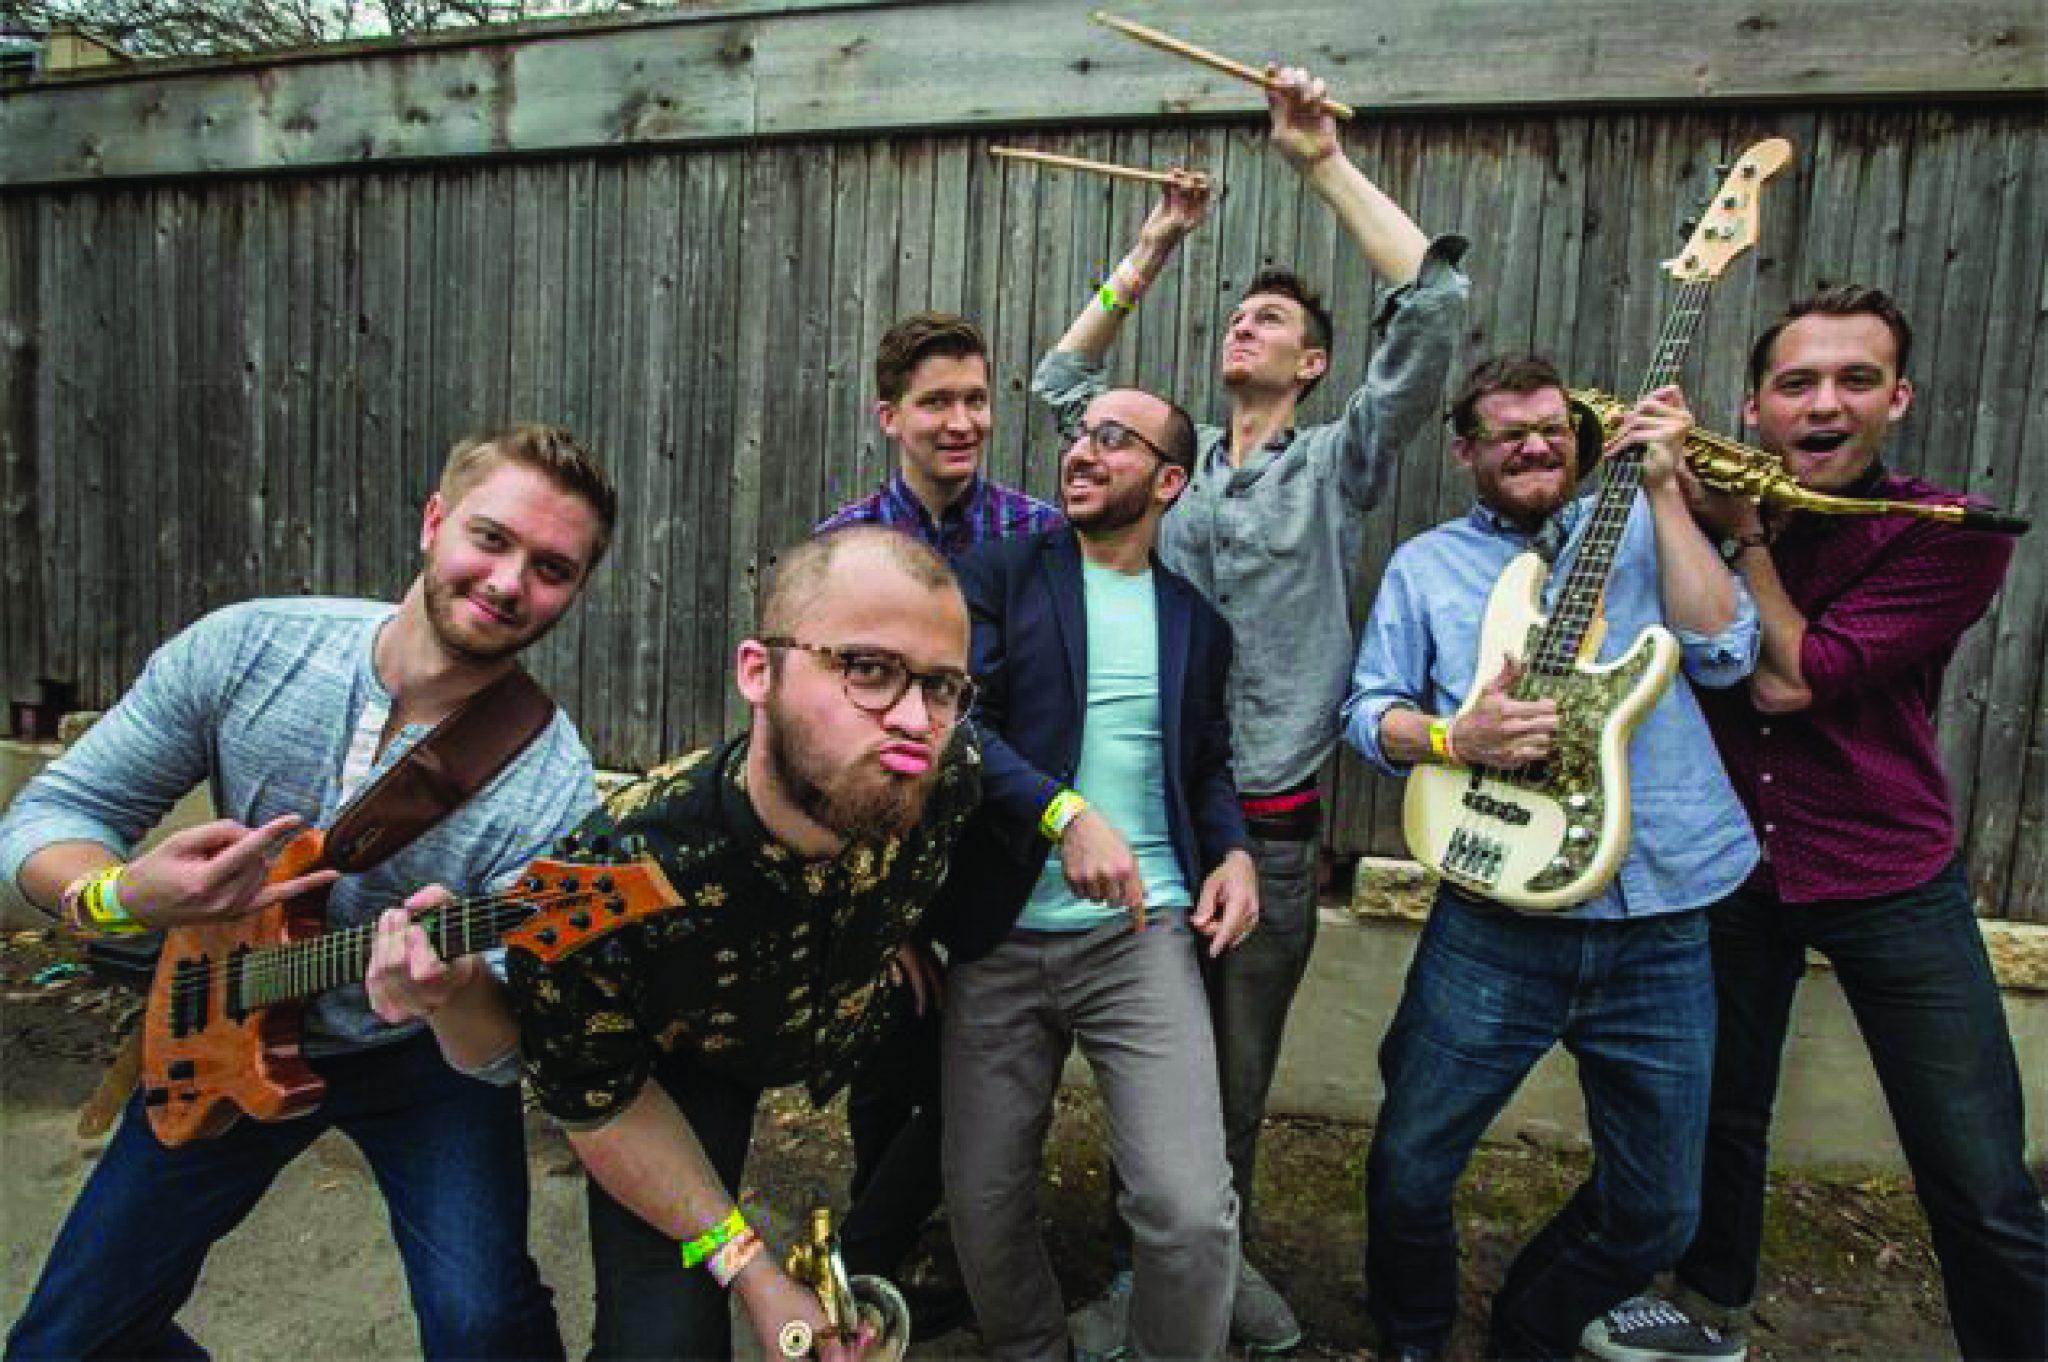 Chicago band Bassel and The Supernaturals. The group is performing at Boone Saloon on Nov. 17.